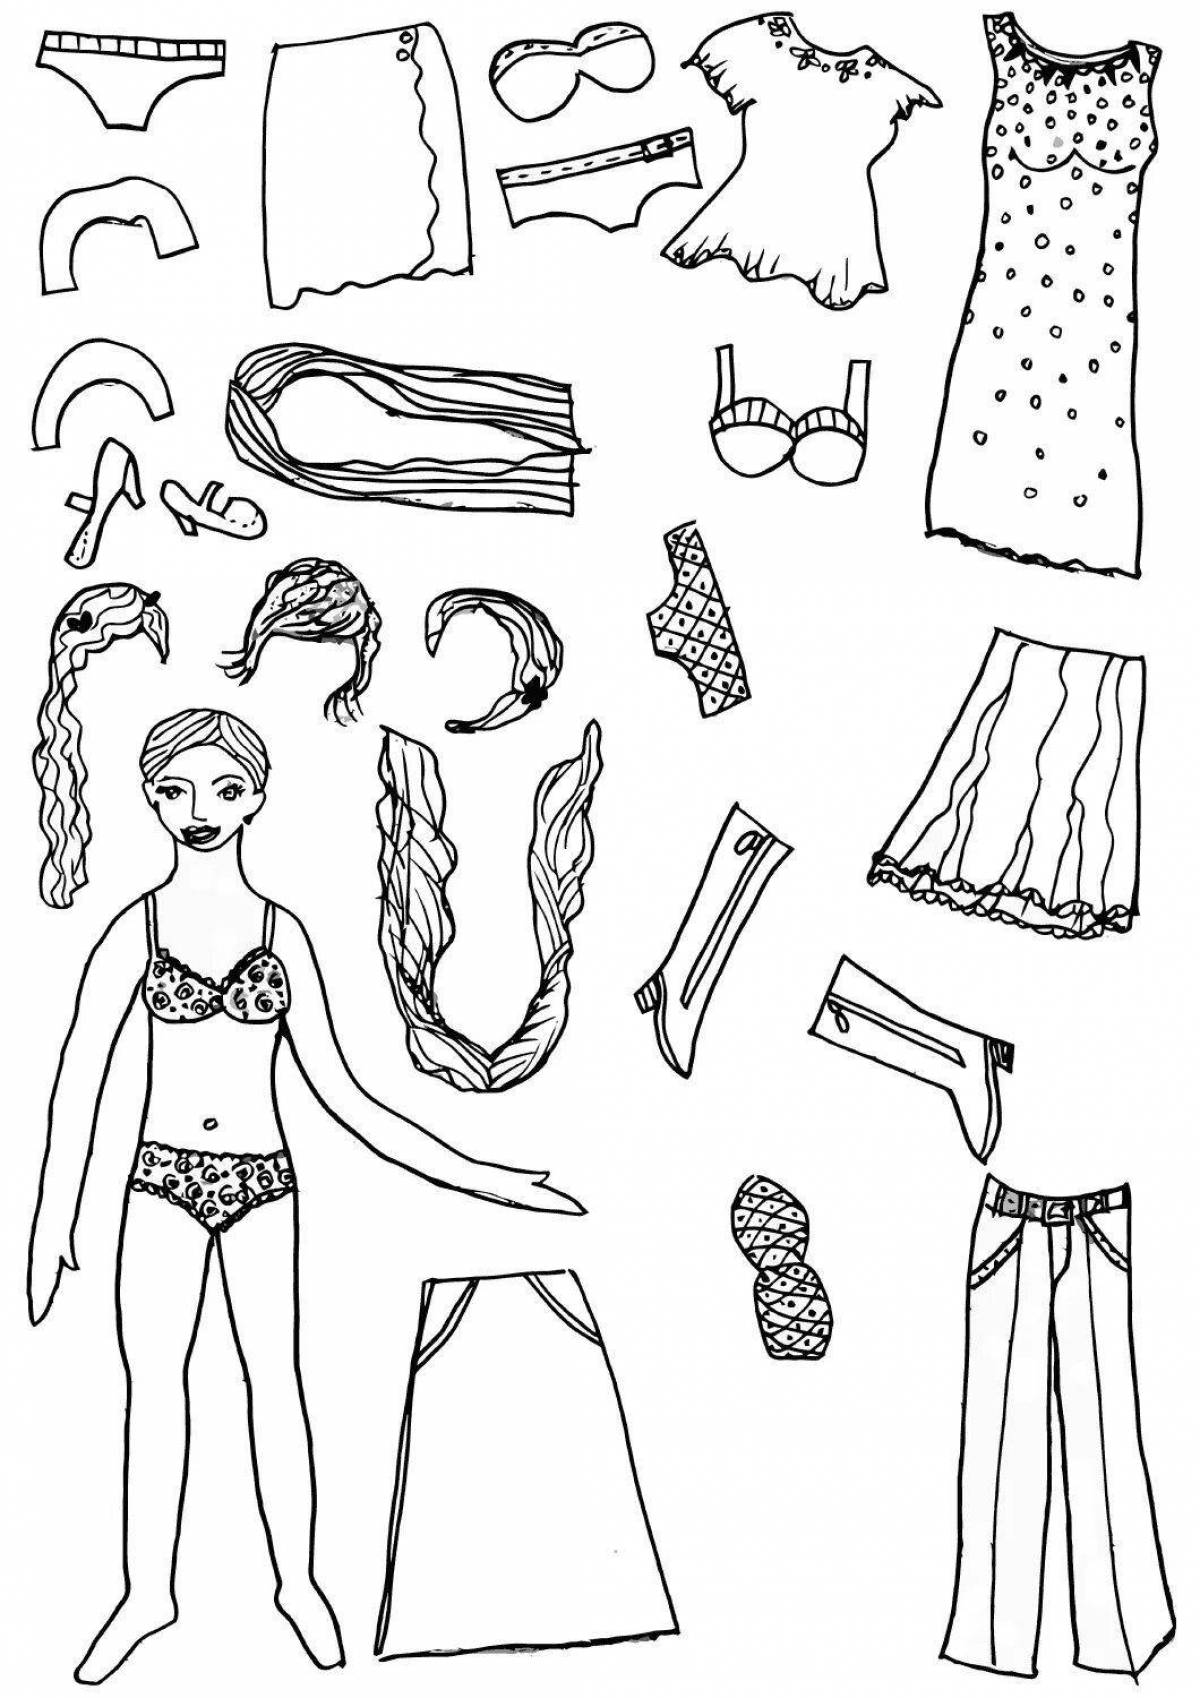 Playful barbie with clothes to cut out